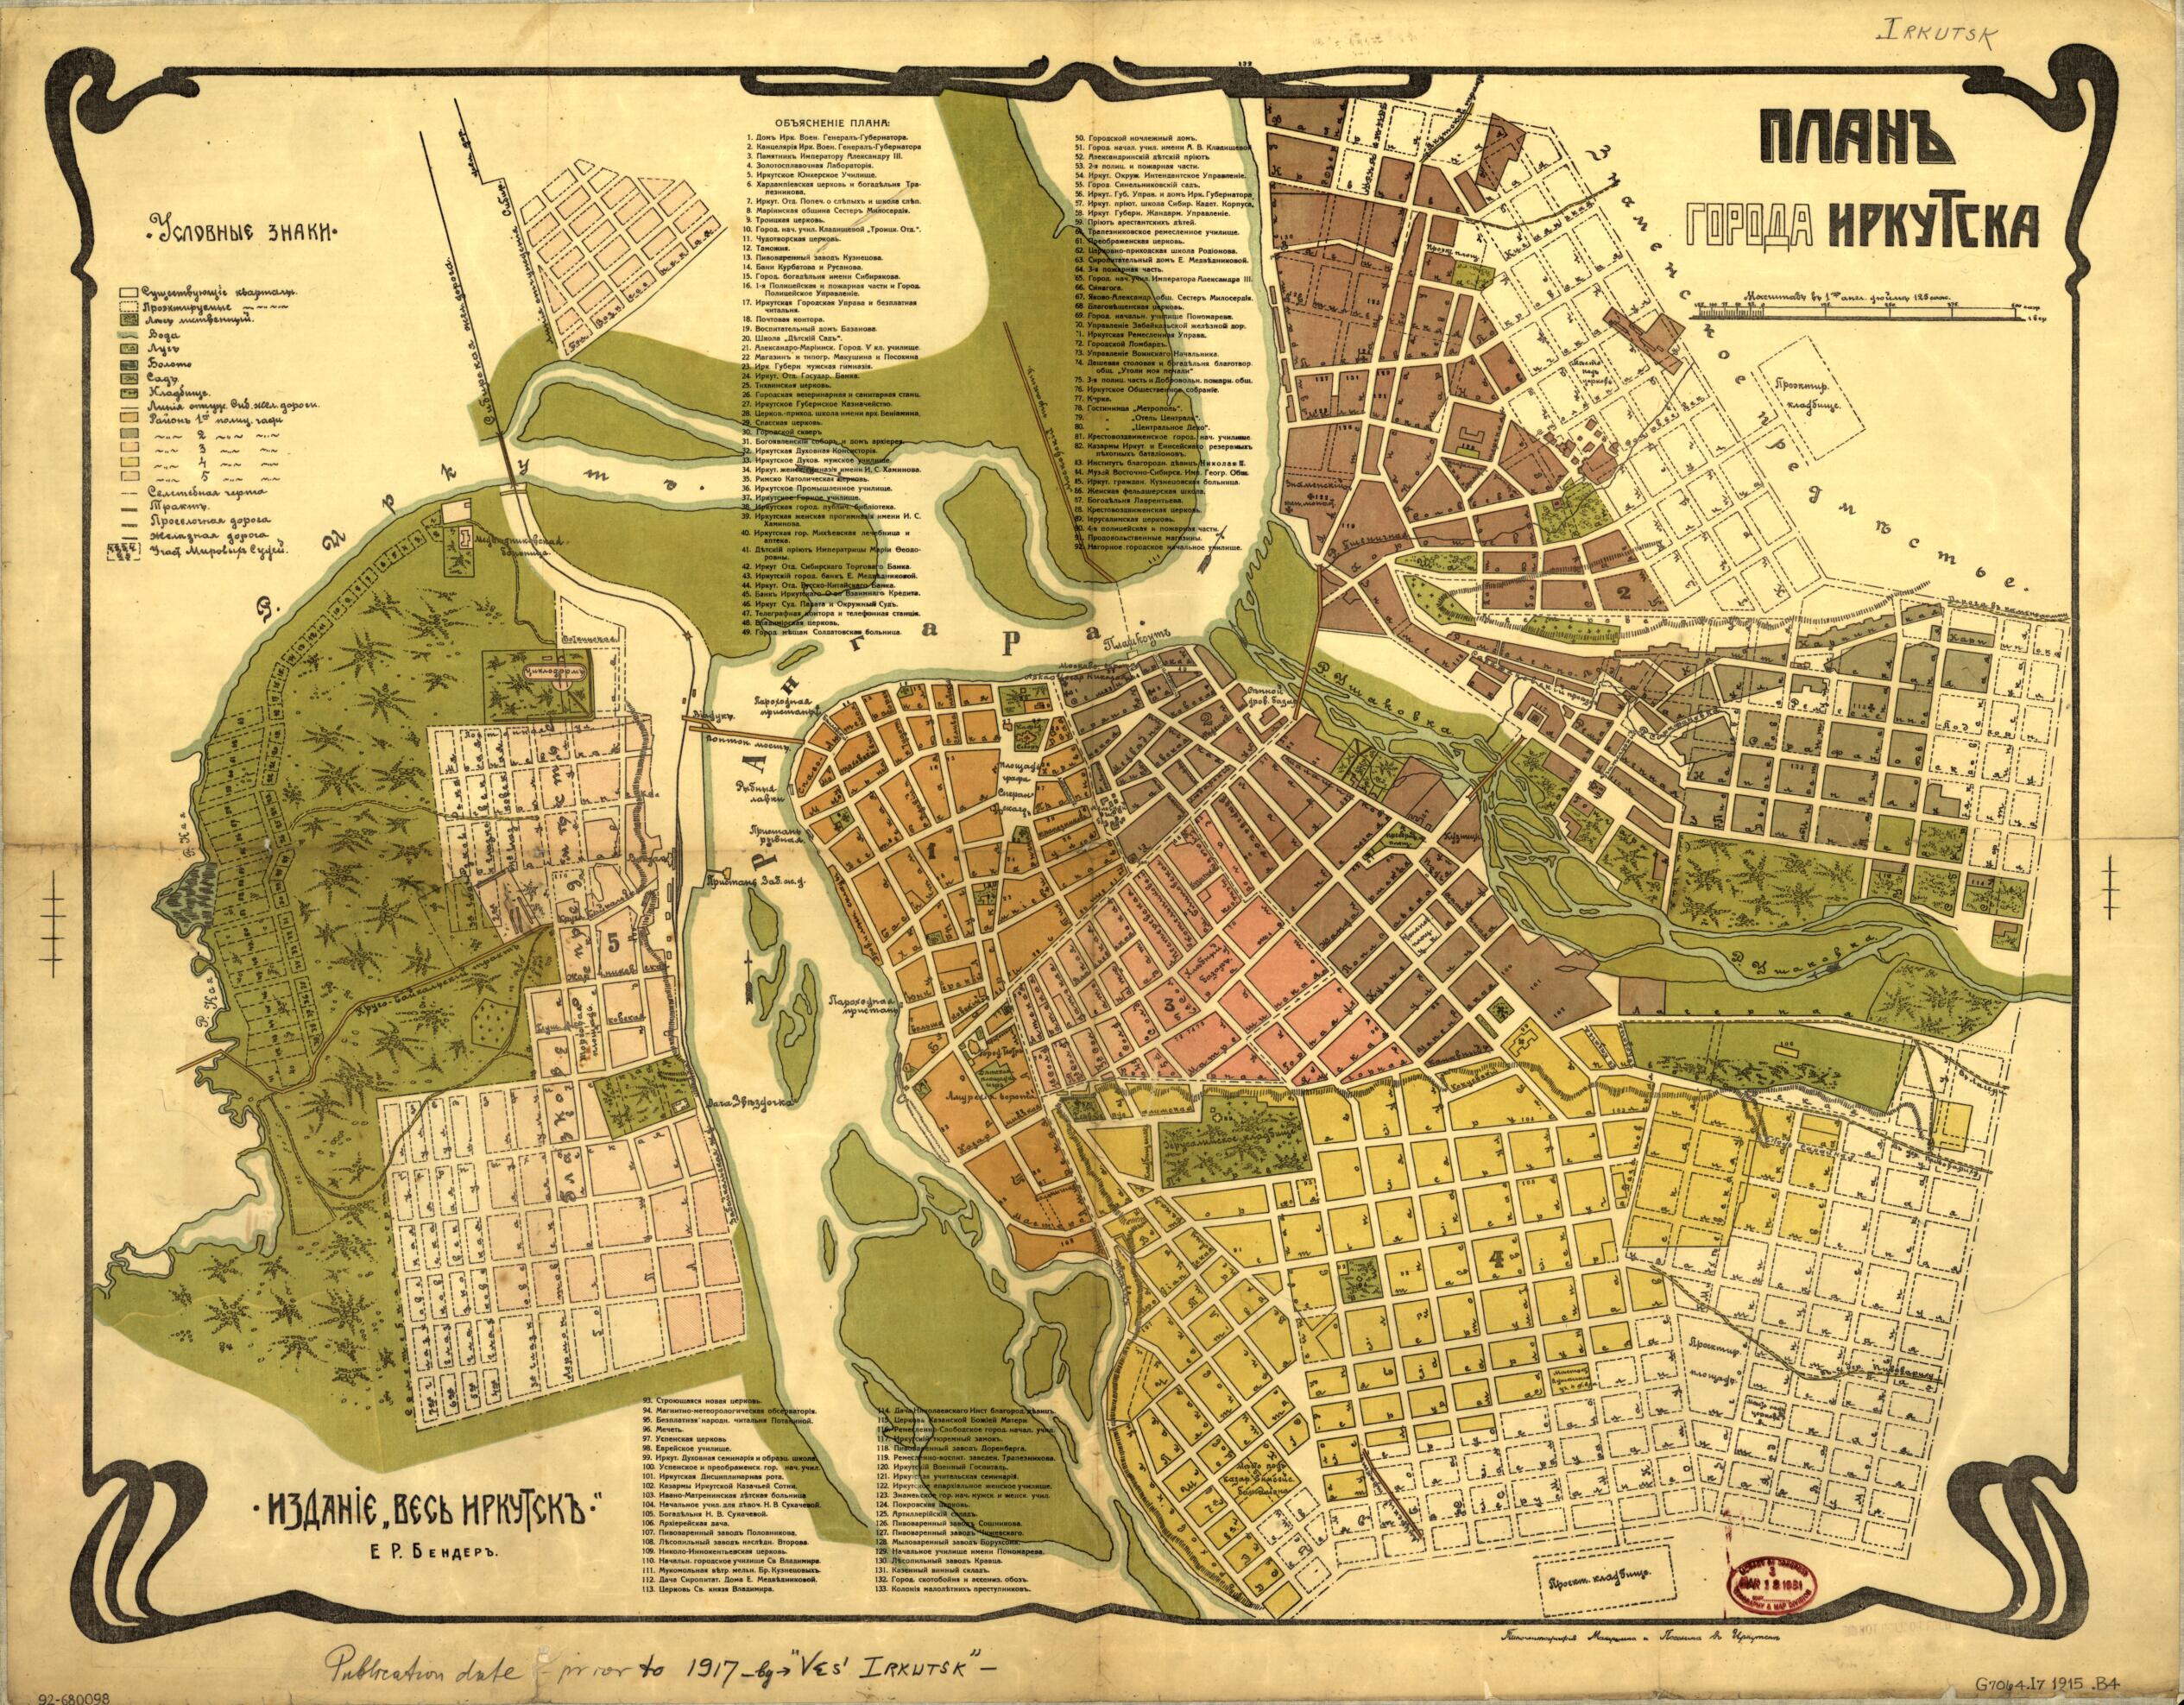 This old map of Plan Goroda Irkutska from 1915 was created by E. R. Bender in 1915